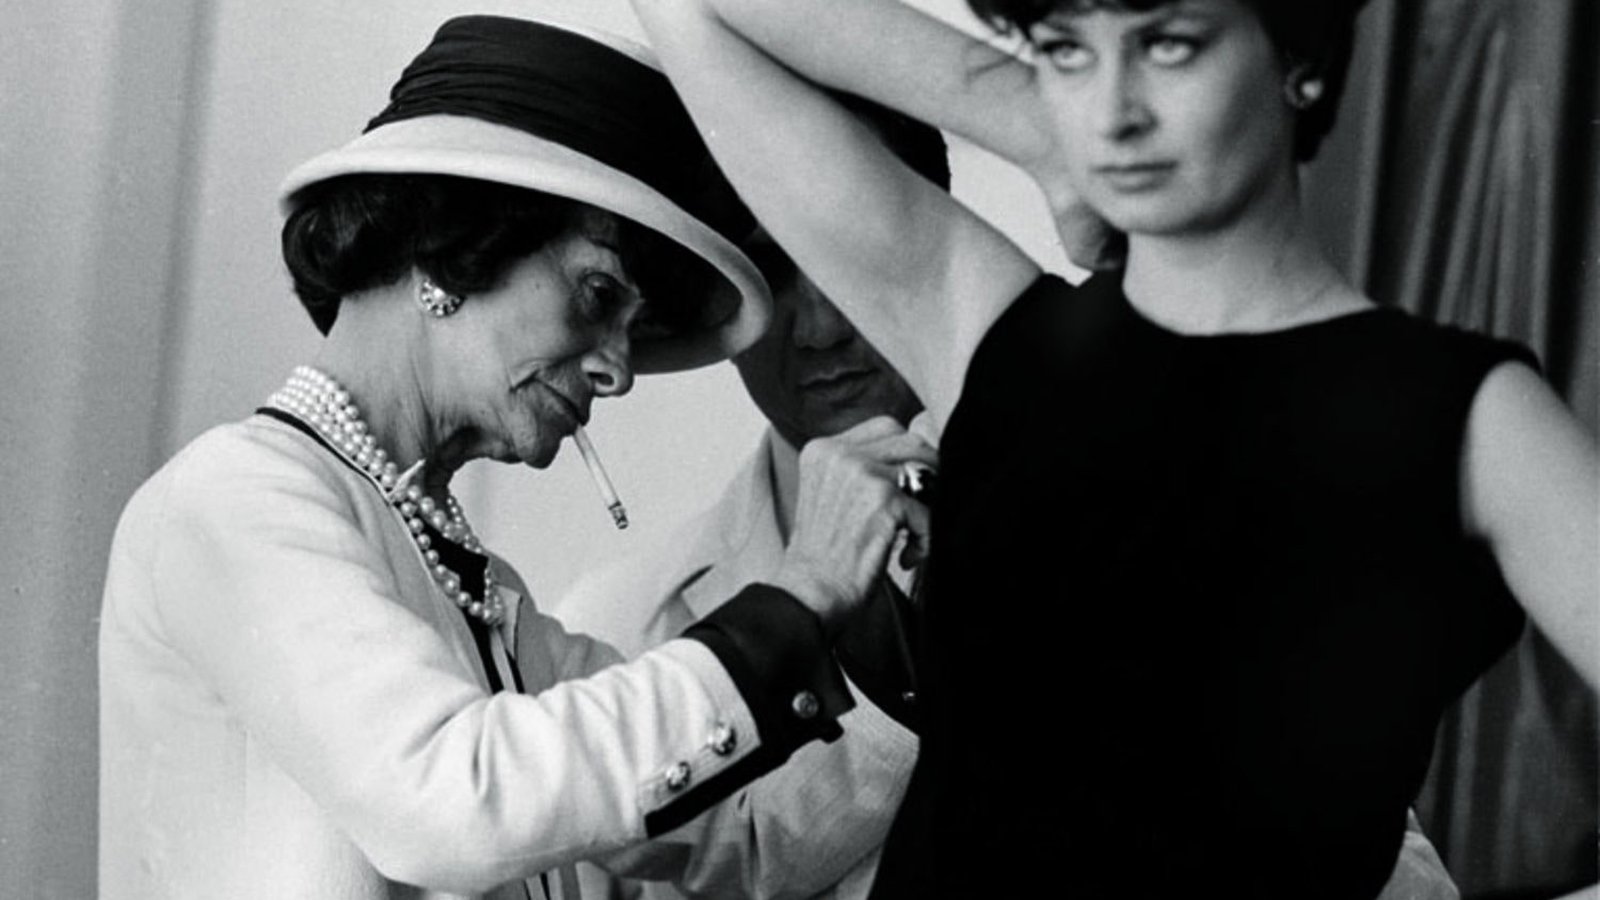 Chanel No. 5 -- Ernest Beaux and Coco Chanel Create A Fabulous